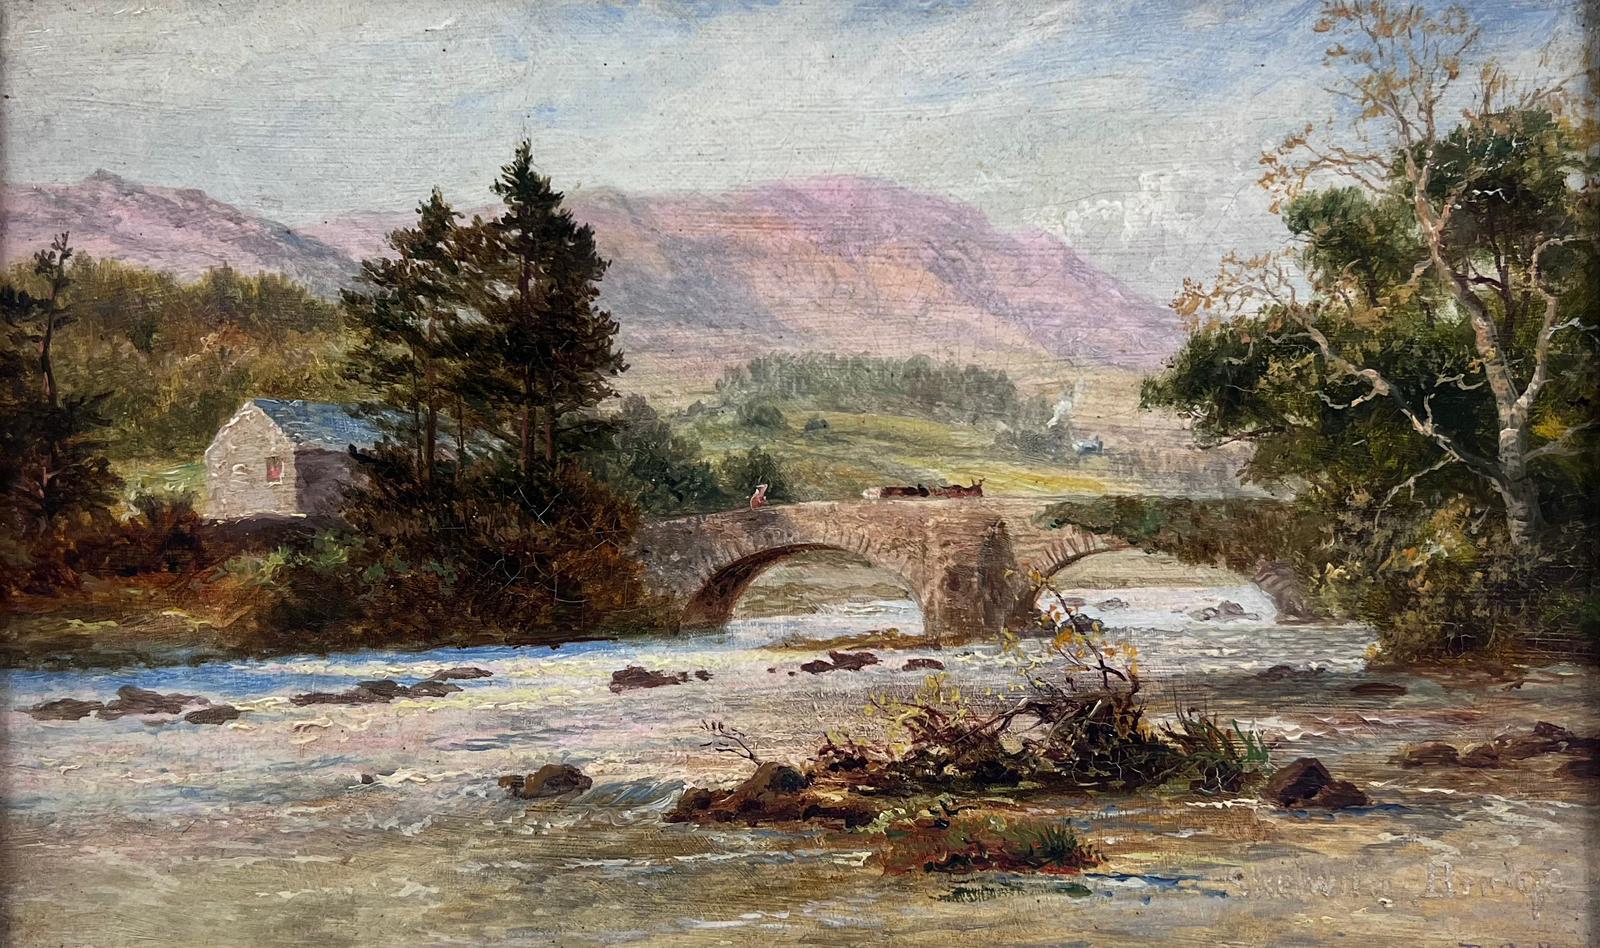 Crossing the Bridge
Scottish School, late 19th century
signed lower corner
oil painting on canvas, framed
framed: 9 x 13 inches
canvas: 7 x 11 inches
provenance: private collection, England
condition: very good and sound condition 
